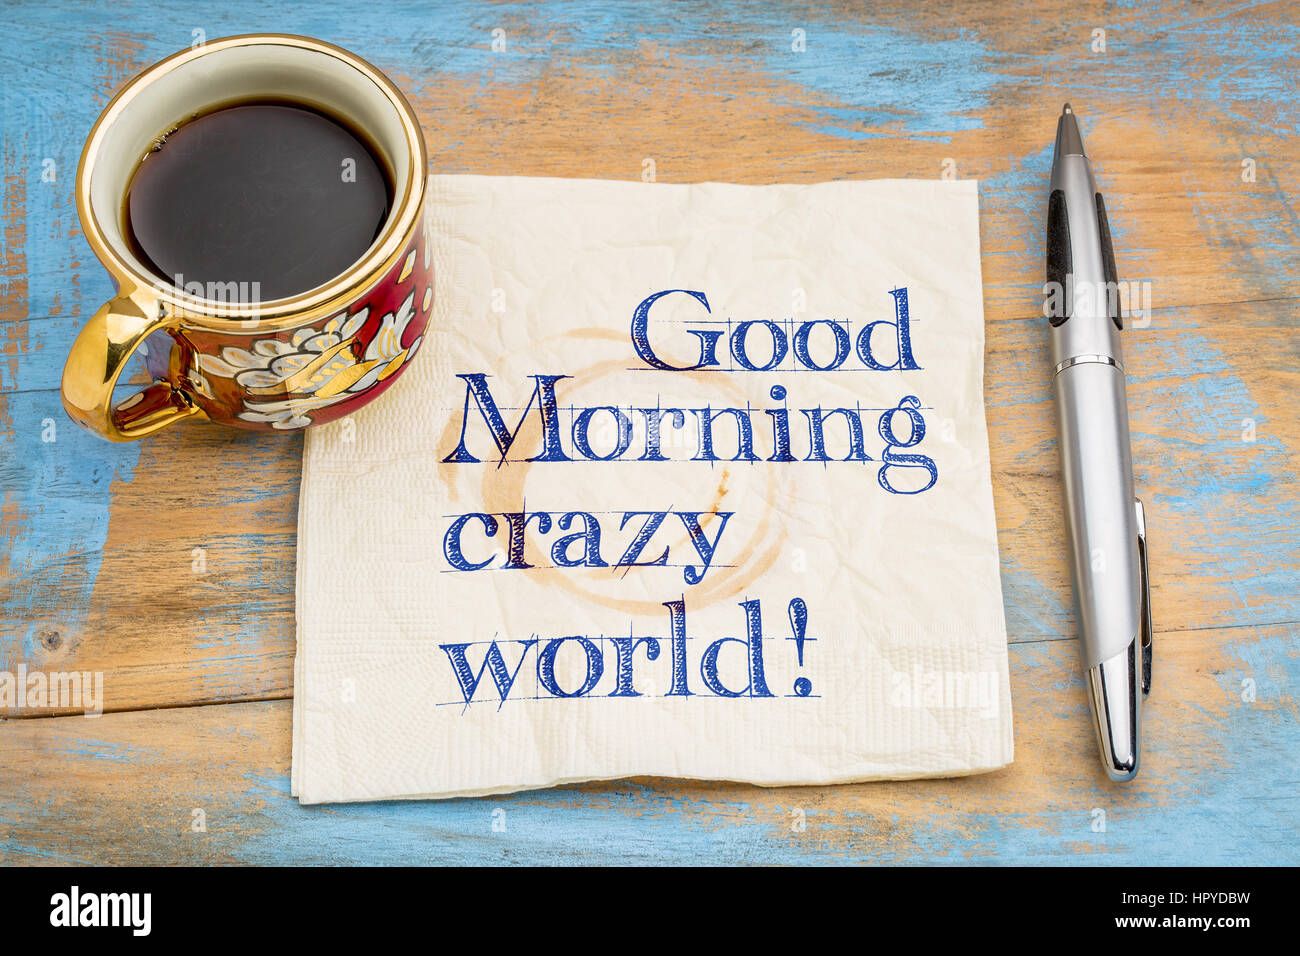 Good Morning crazy world - handwriting on a napkin with a cup of espresso coffee Stock Photo